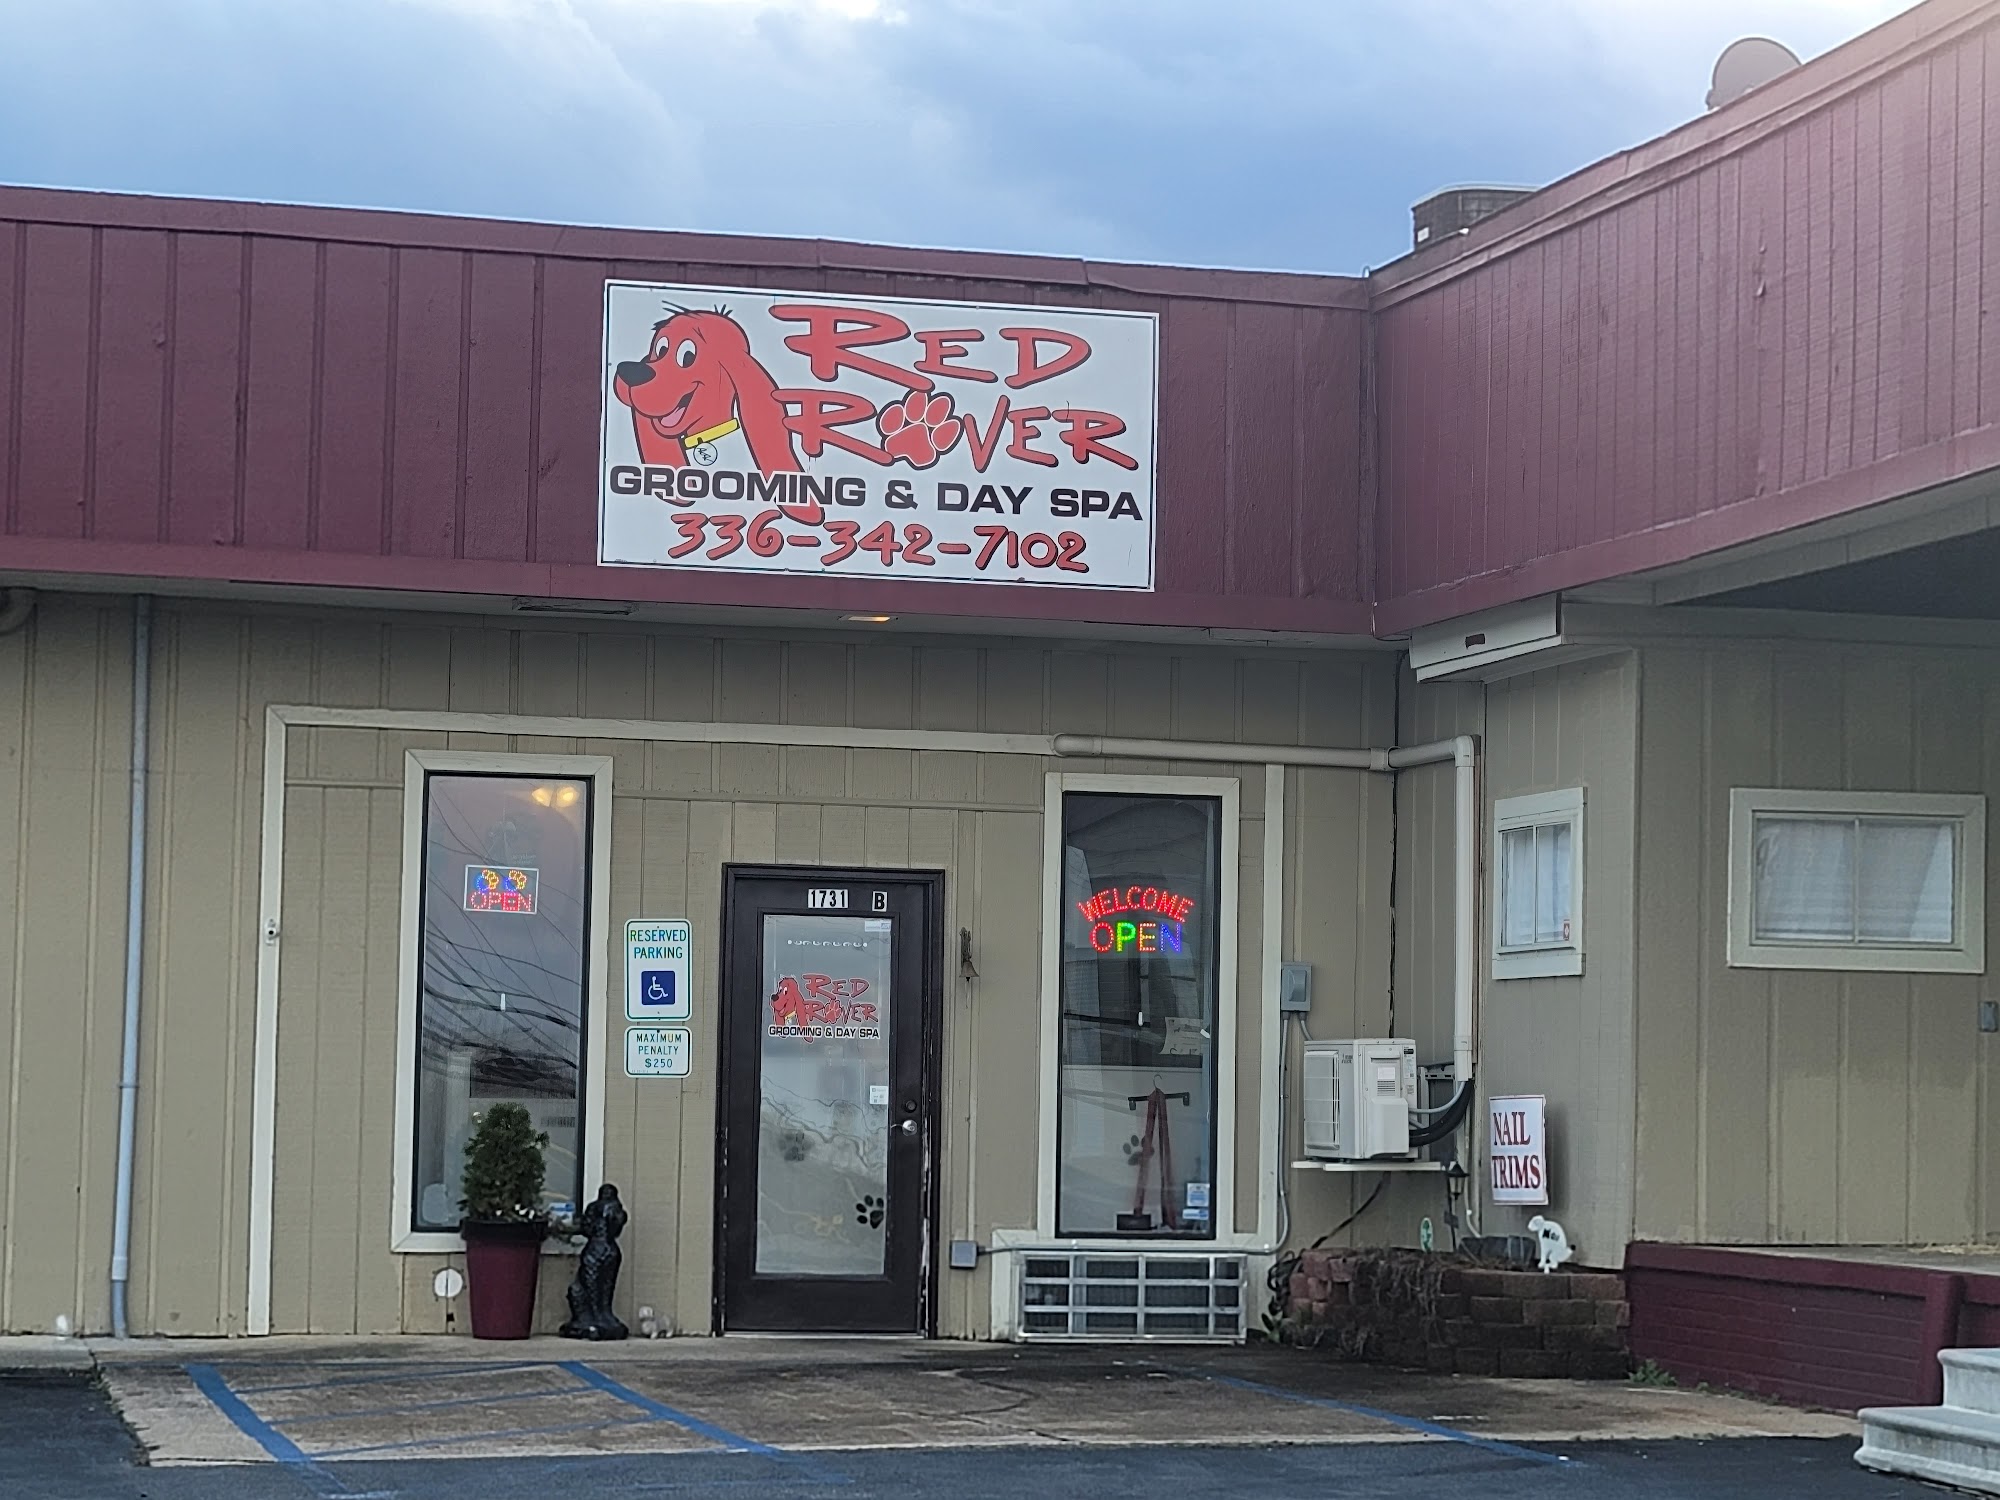 Red Rover Grooming & Day Spa, LLC